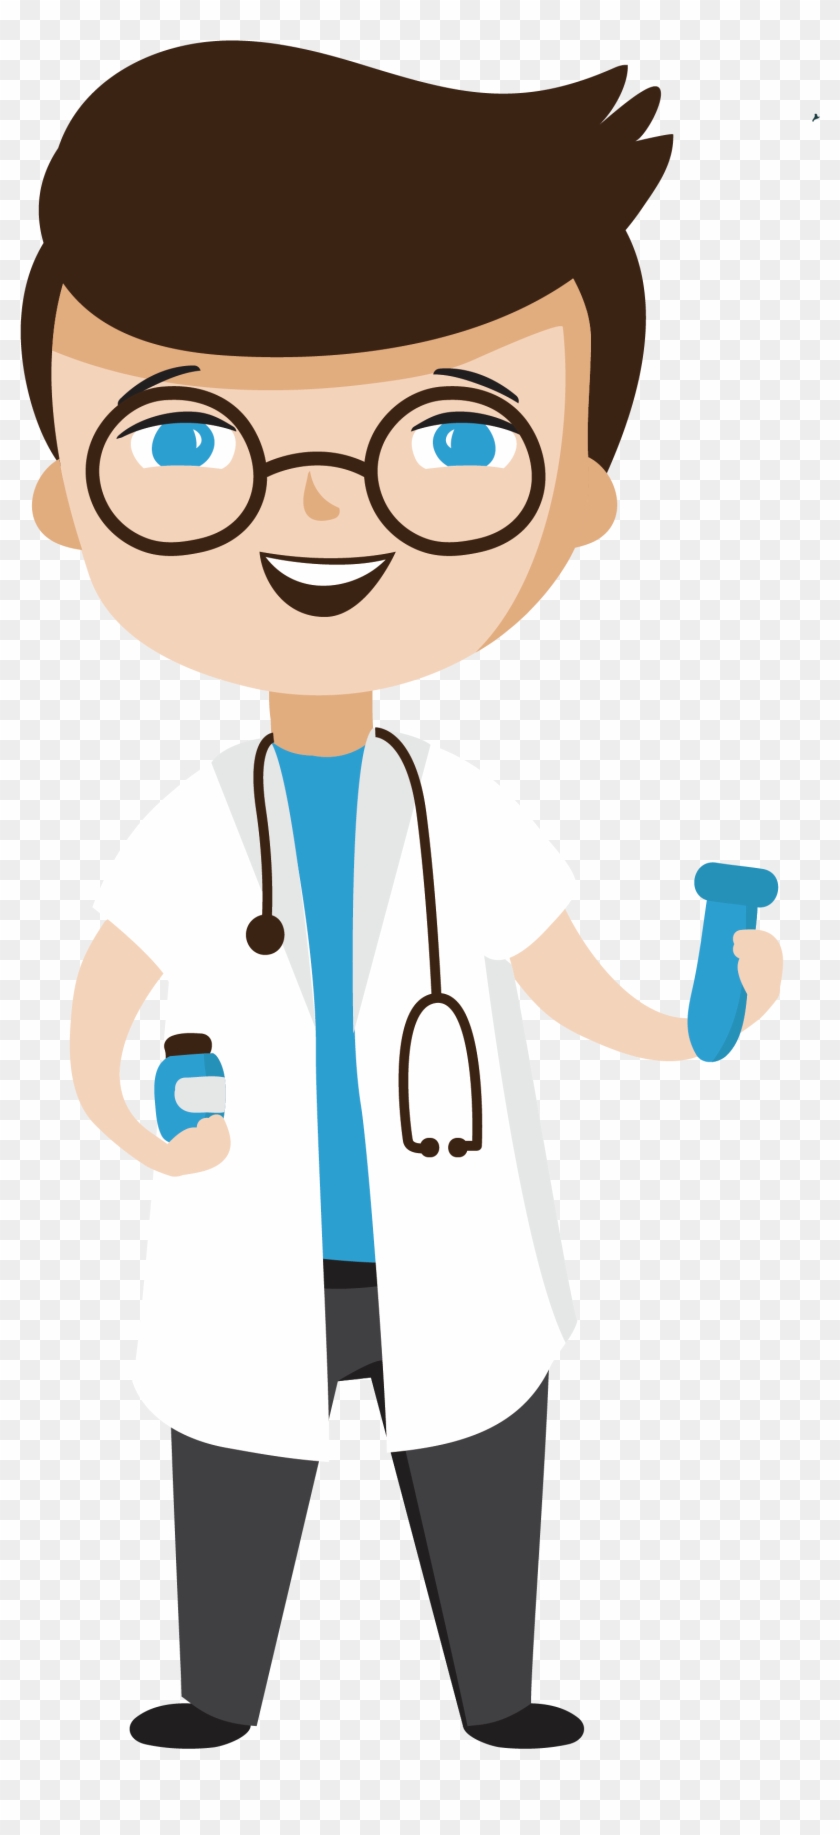 Cartoon Picture Of A Doctor - หมอ การ์ตูน Clipart #4649645